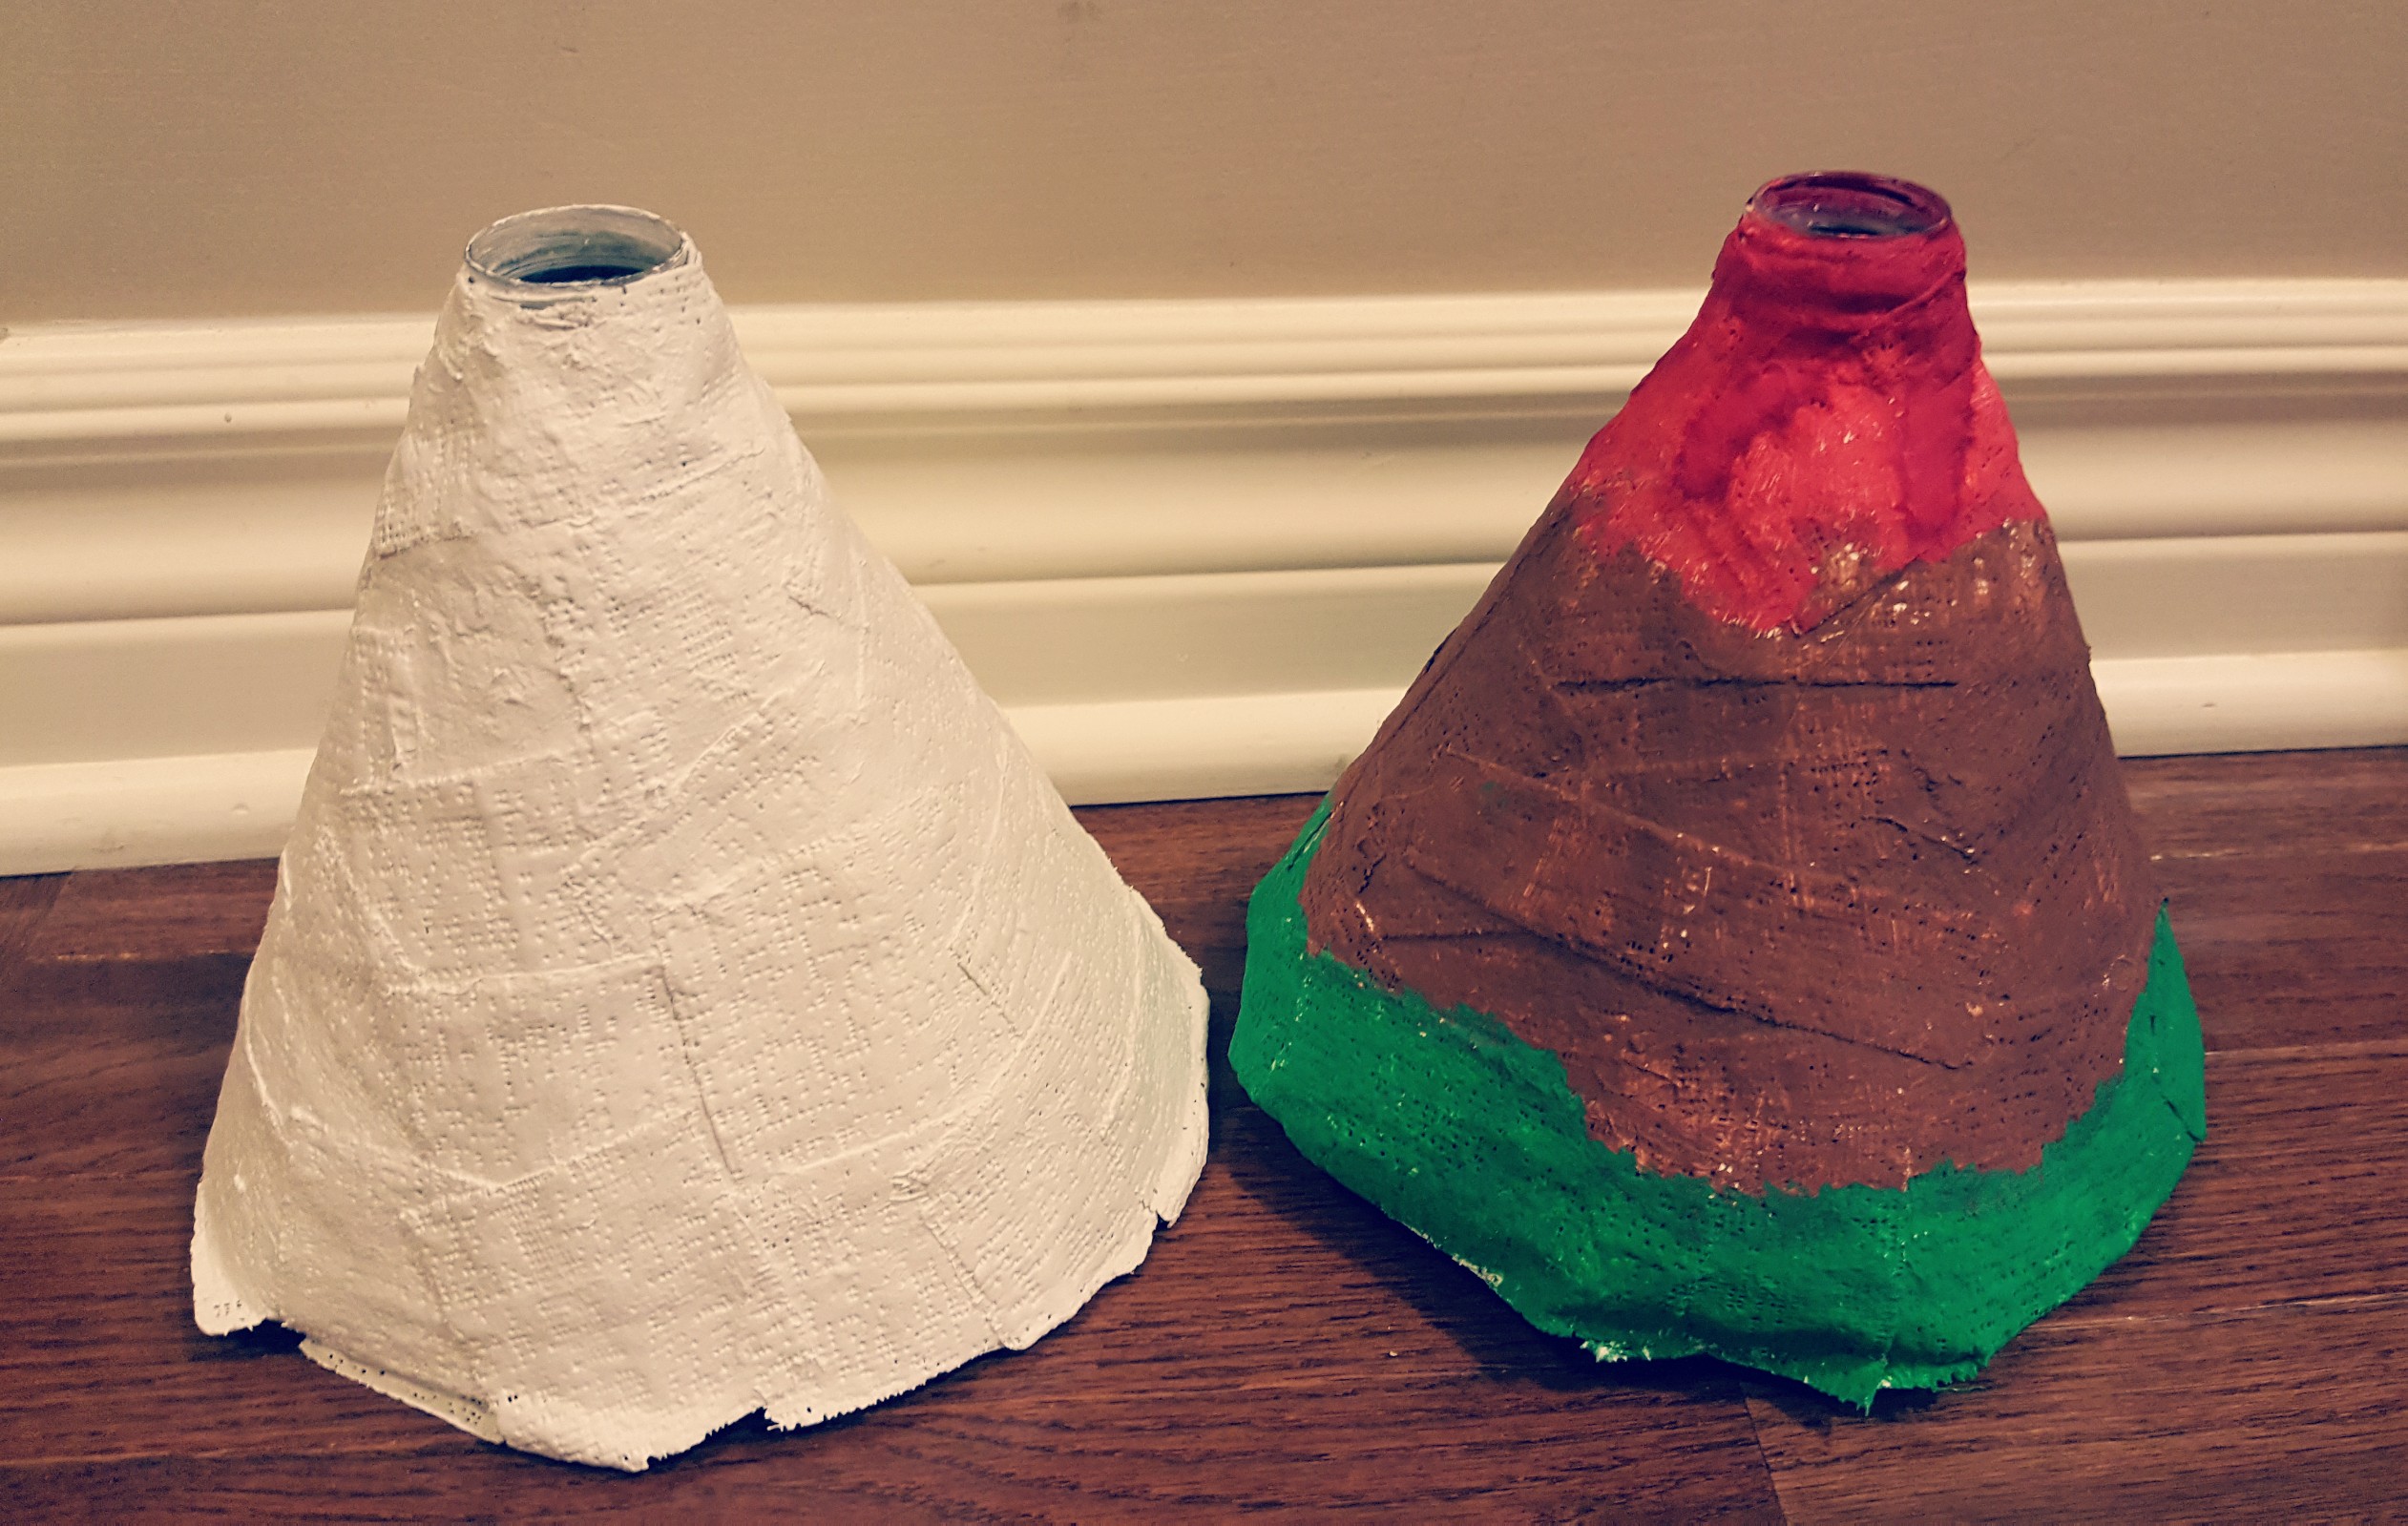 Easy Diy Volcano For Kids Science And Art Hands On Teaching Ideas